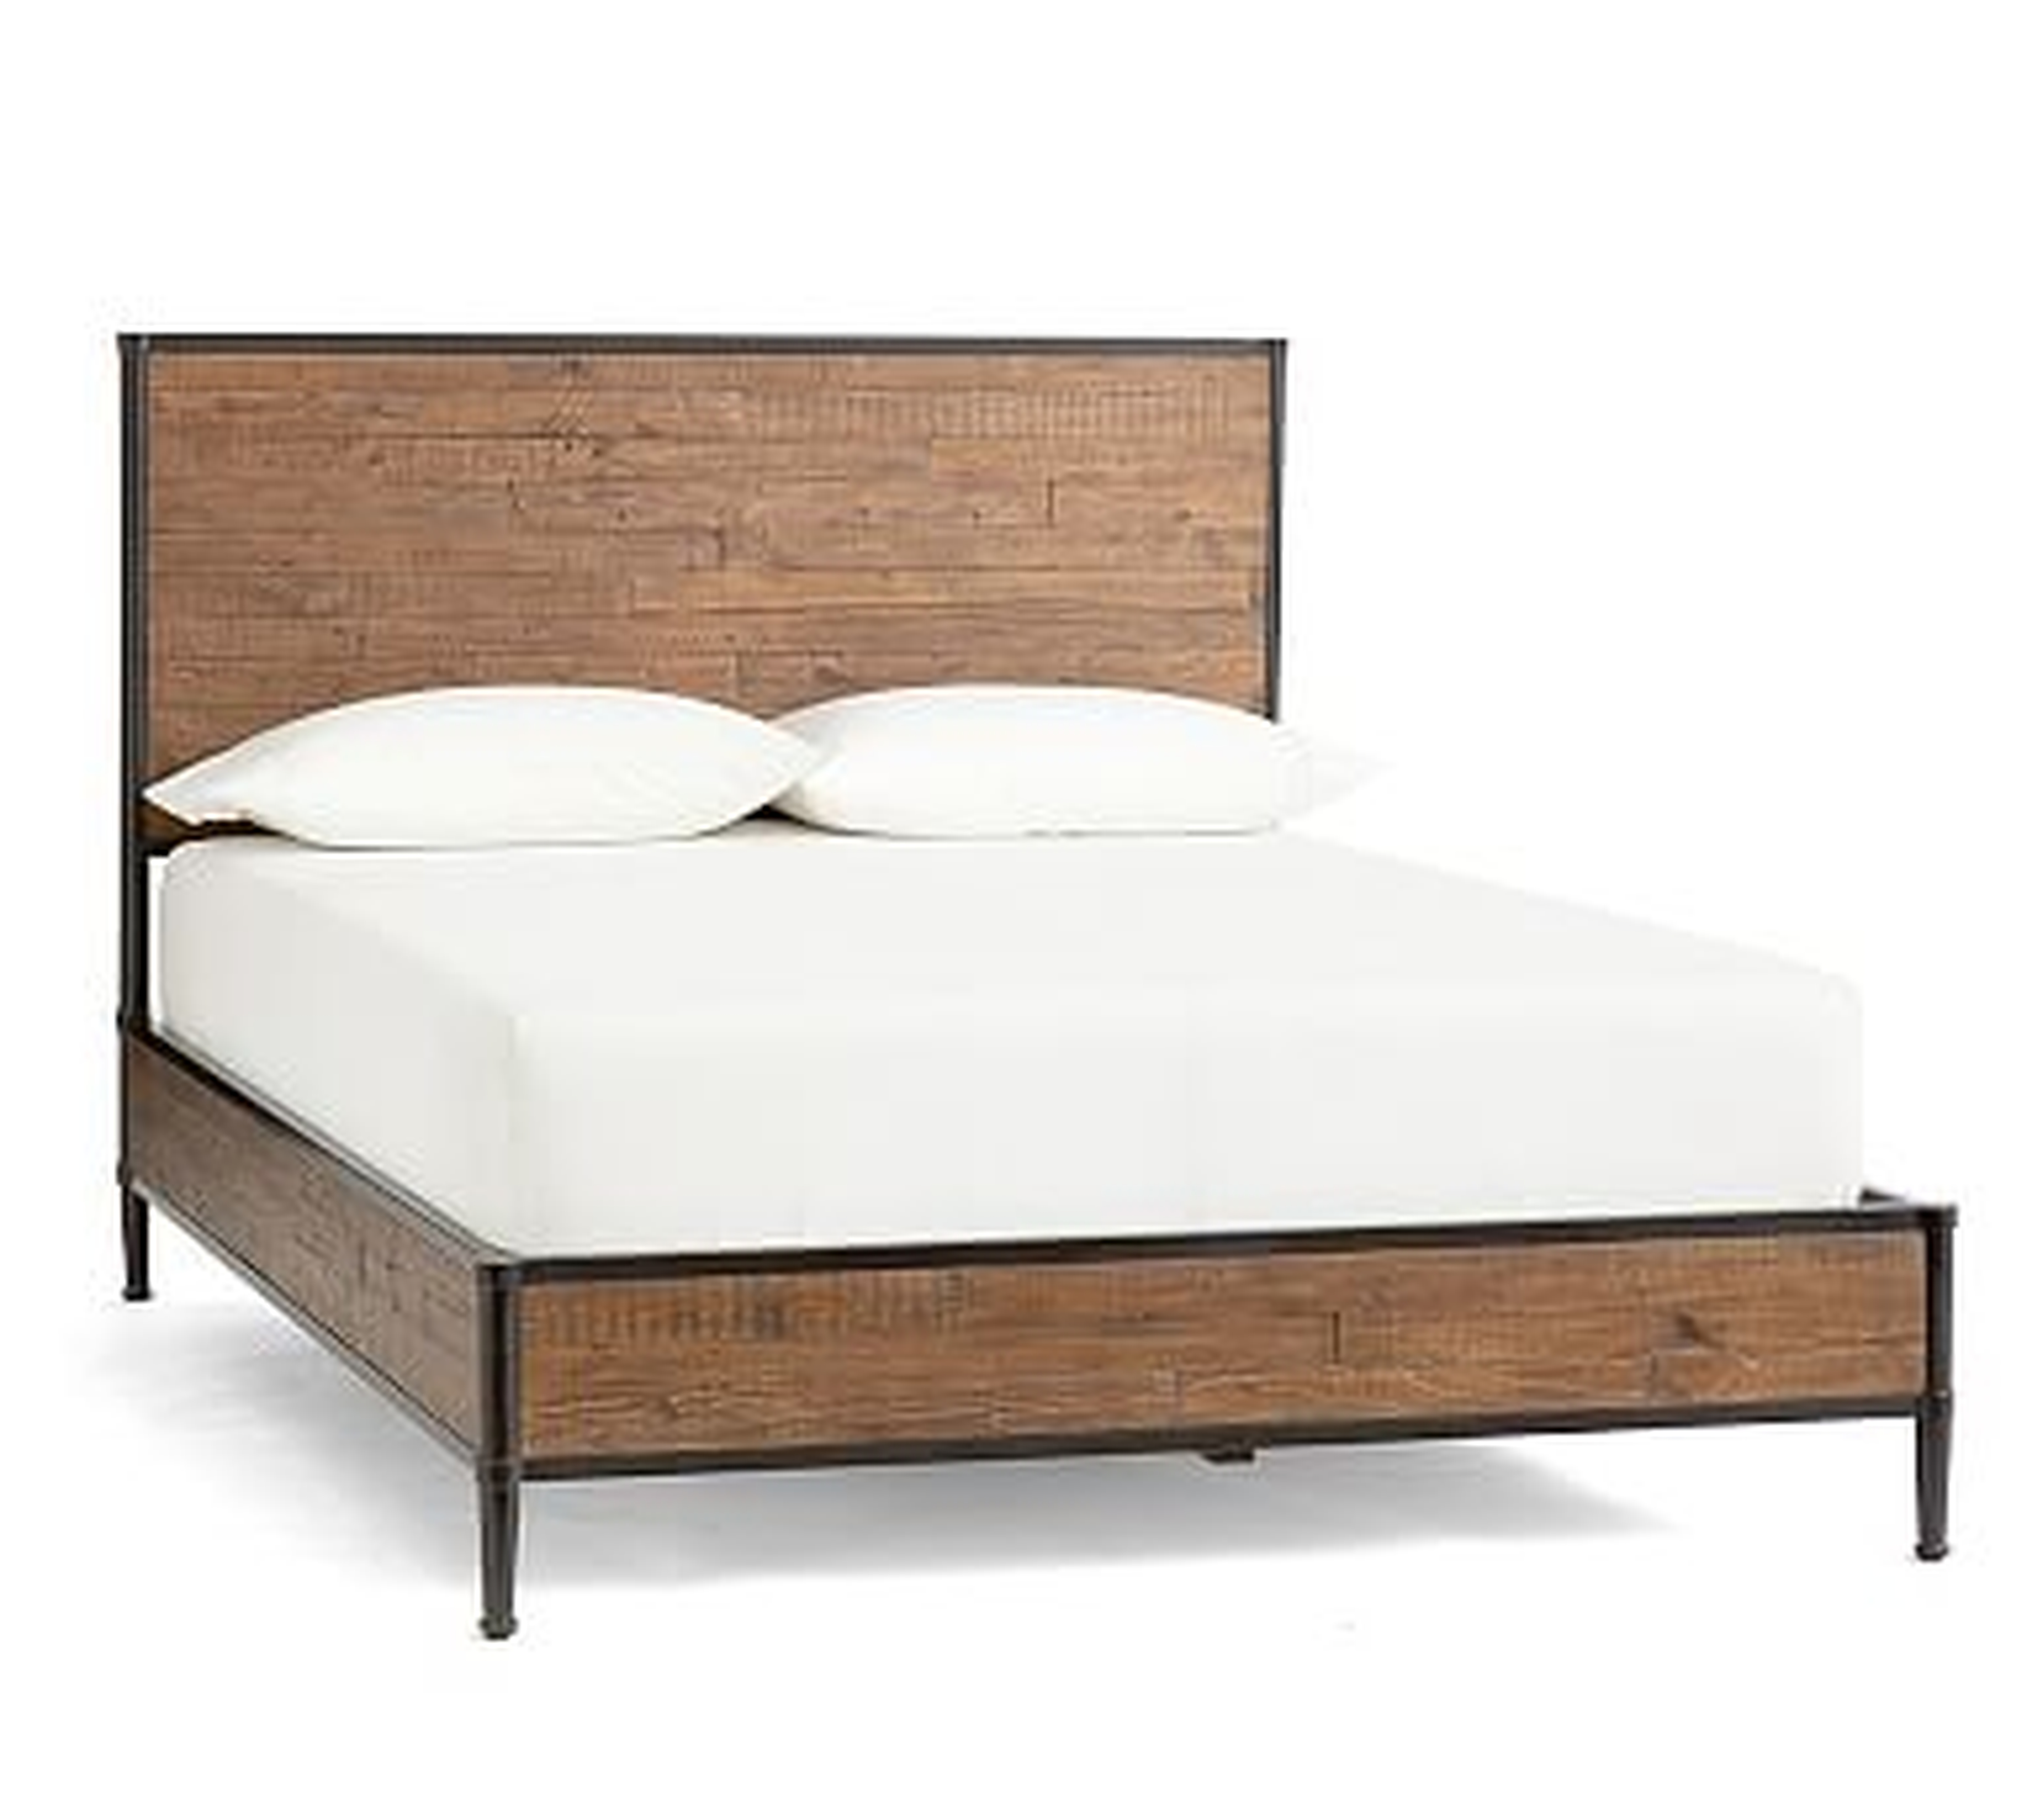 Juno Reclaimed Wood Bed, King, Reclaimed Pine - Pottery Barn